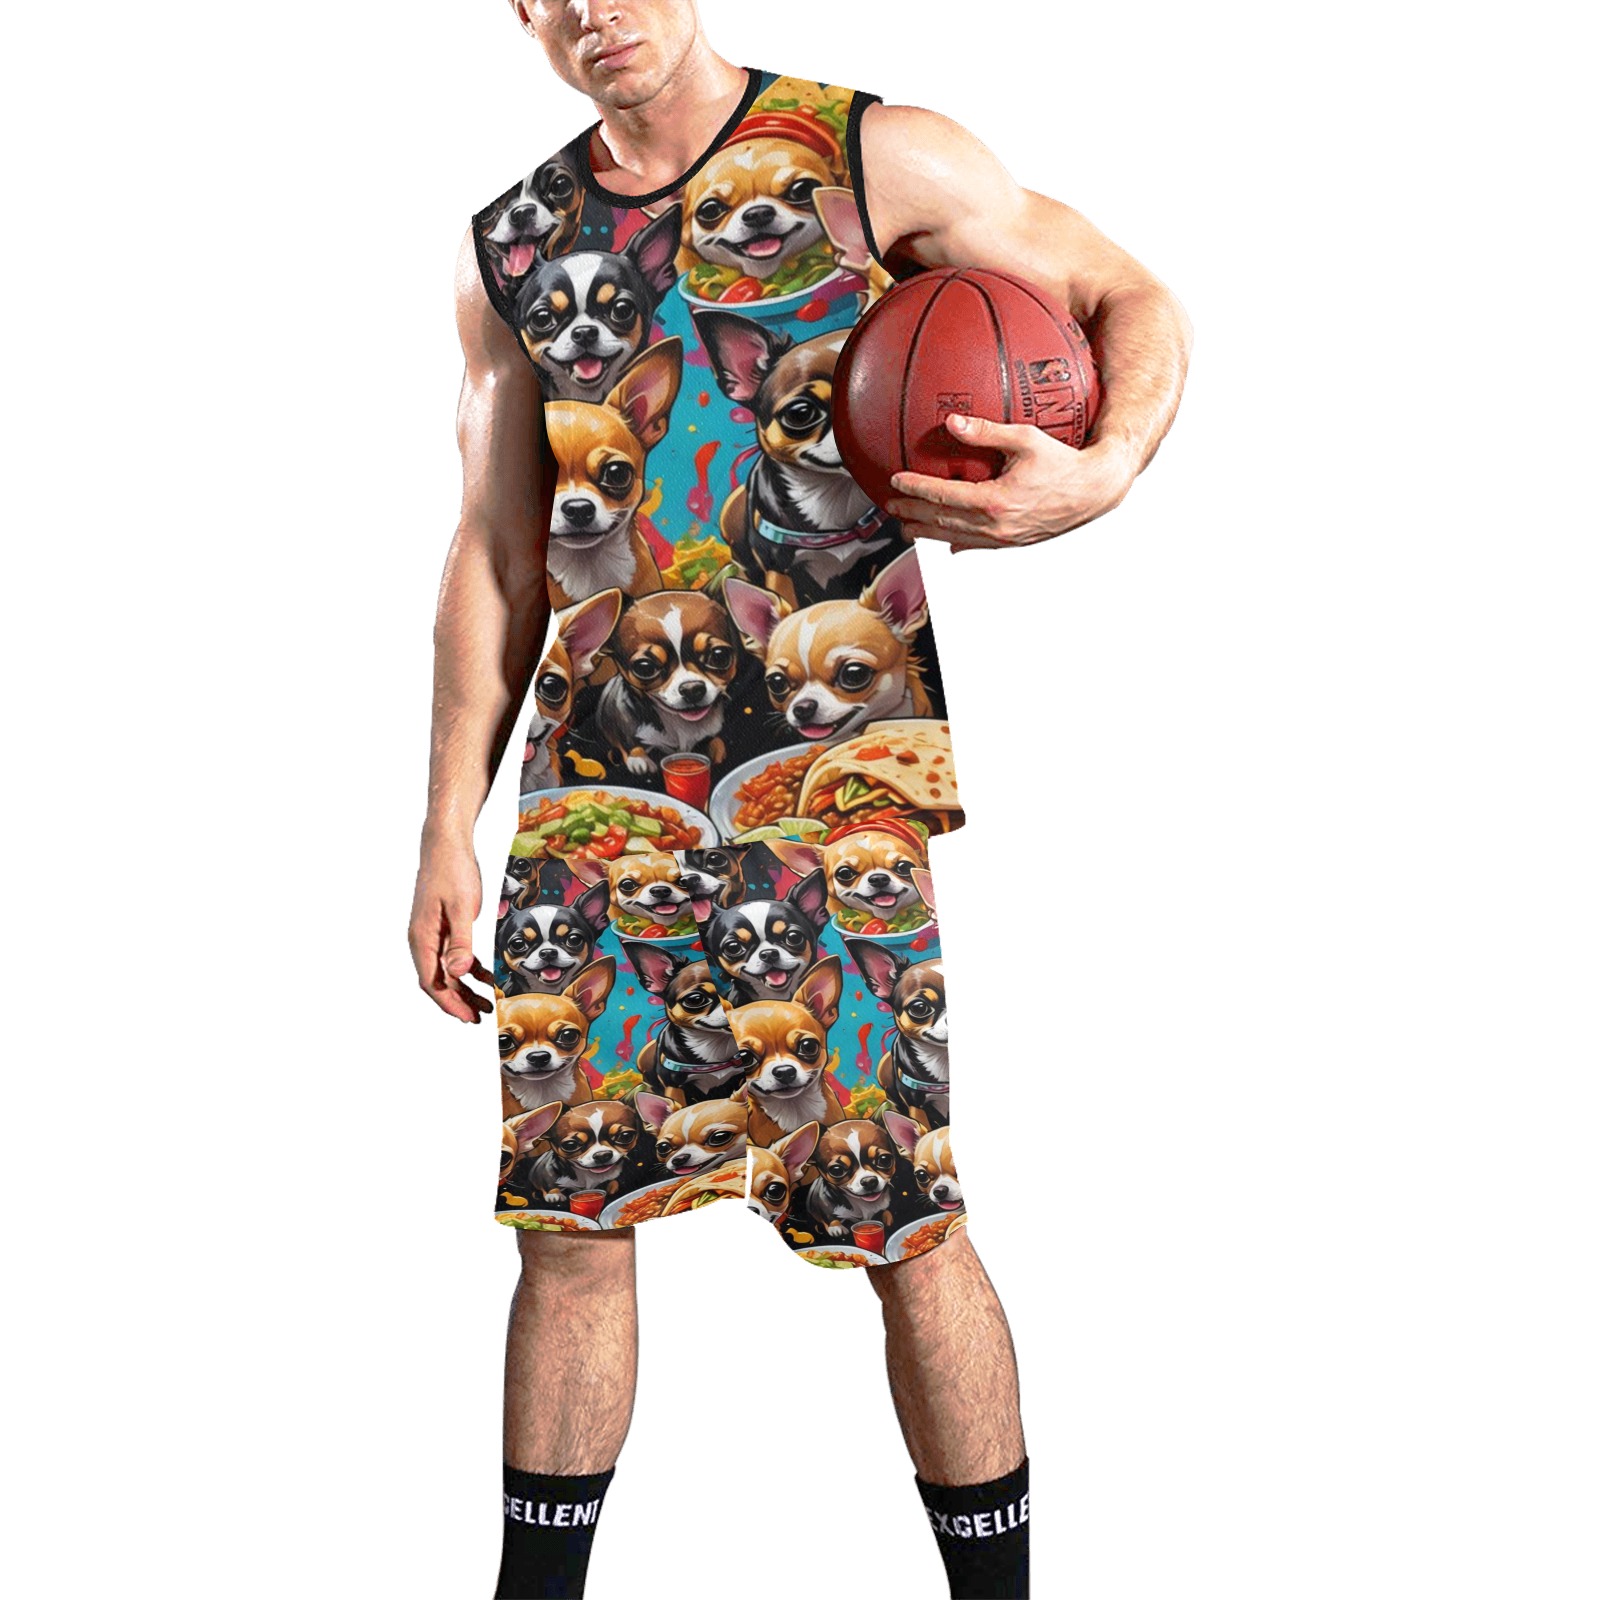 CHIHUAHUAS EATING MEXICAN FOOD 2 All Over Print Basketball Uniform